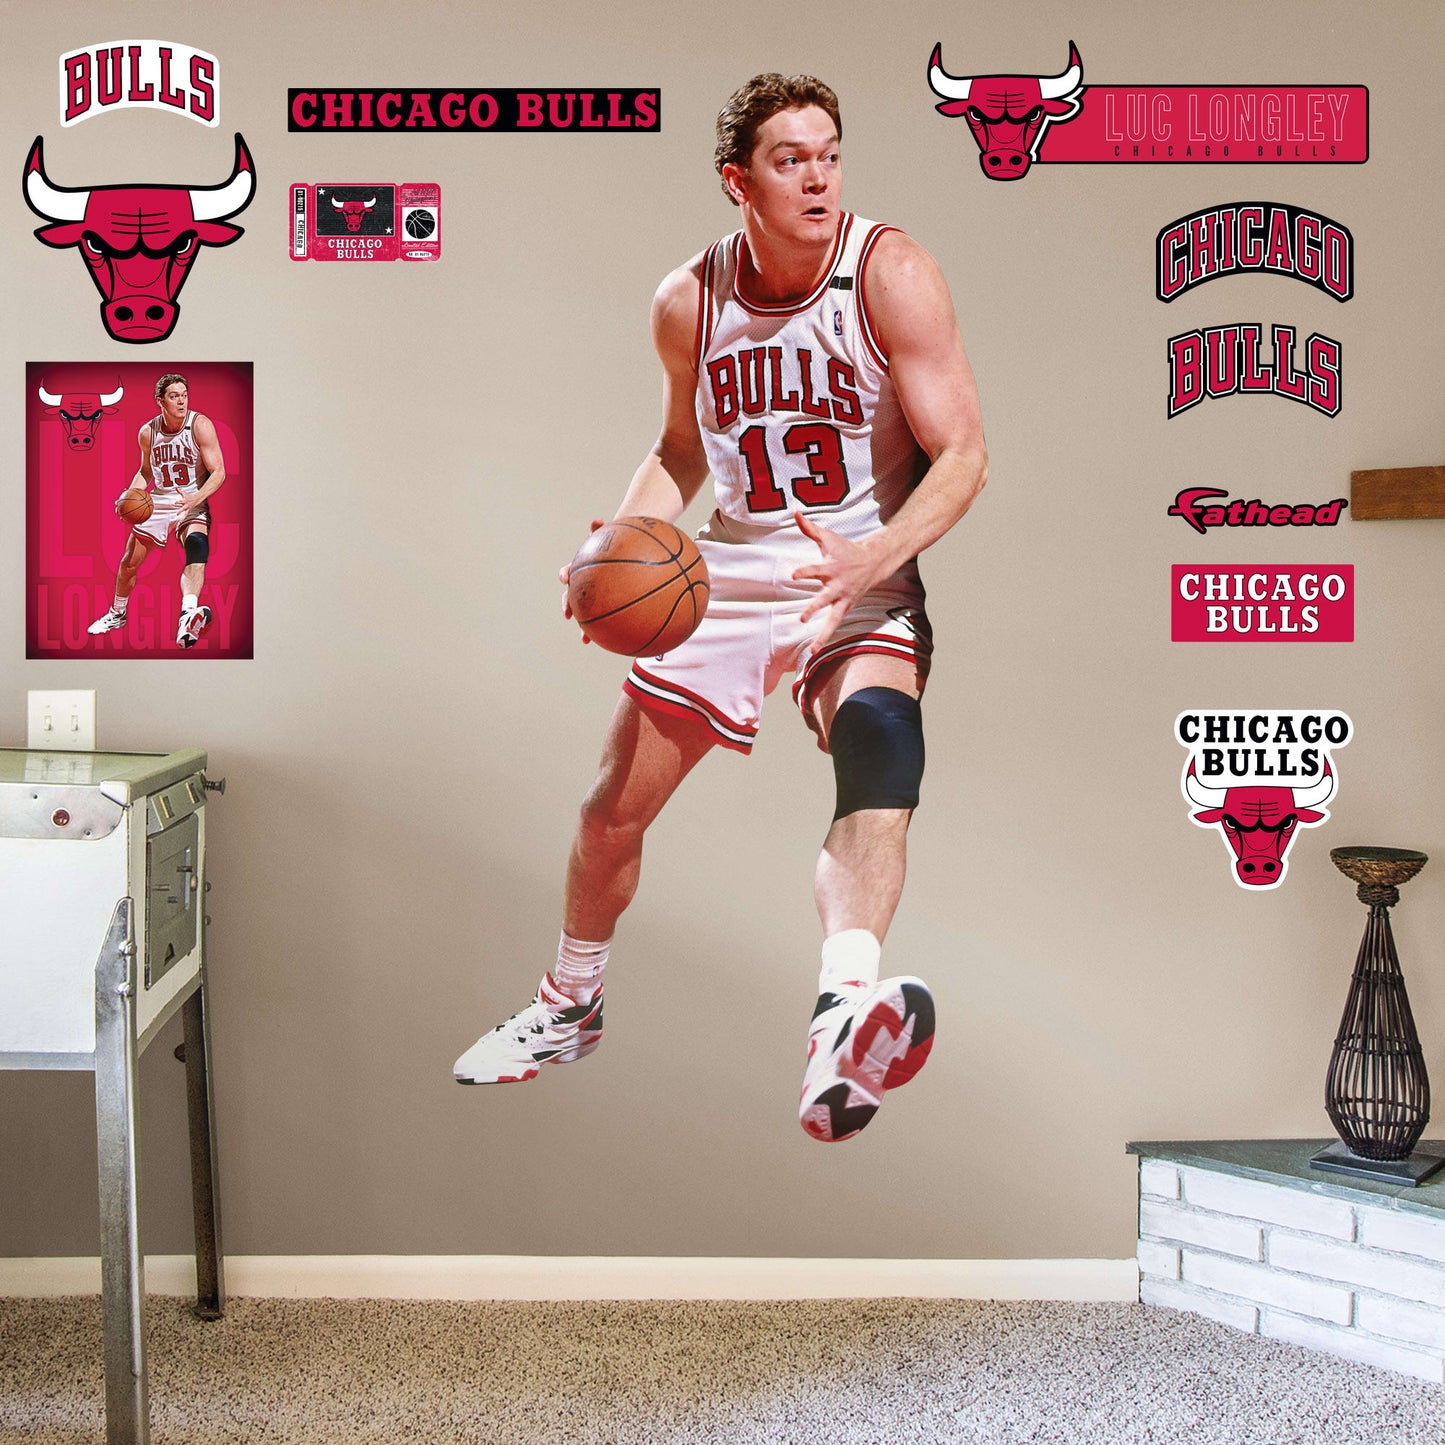 Luc Longley for Chicago Bulls - NBA Removable Wall Decal Giant Athlete + 2 Wall Decals 25W x 51H